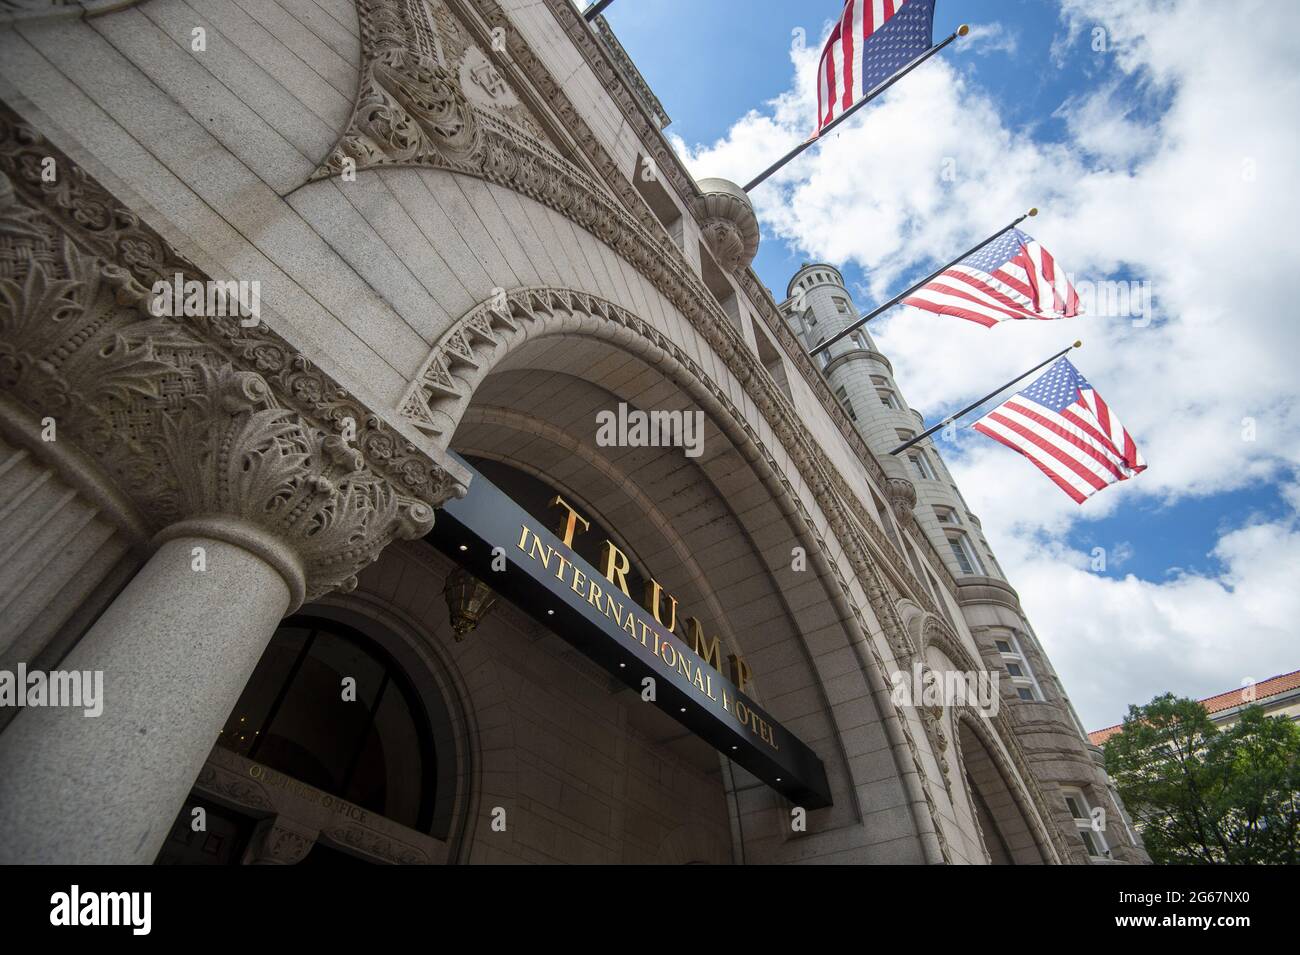 Washington, United States. 03rd July, 2021. The Trump International Hotel stands at 1100 Pennsylvania Ave in Washington, DC on Saturday, July 3, 2021. The Trump Organization, the real estate company that was led by former President Donald Trump, was charged in New York on Thursday, July 1, with 15 felonies in regards to running an illegal tax avoidance scheme for 15 years. Photo by Bonnie Cash/UPI' Credit: UPI/Alamy Live News Stock Photo